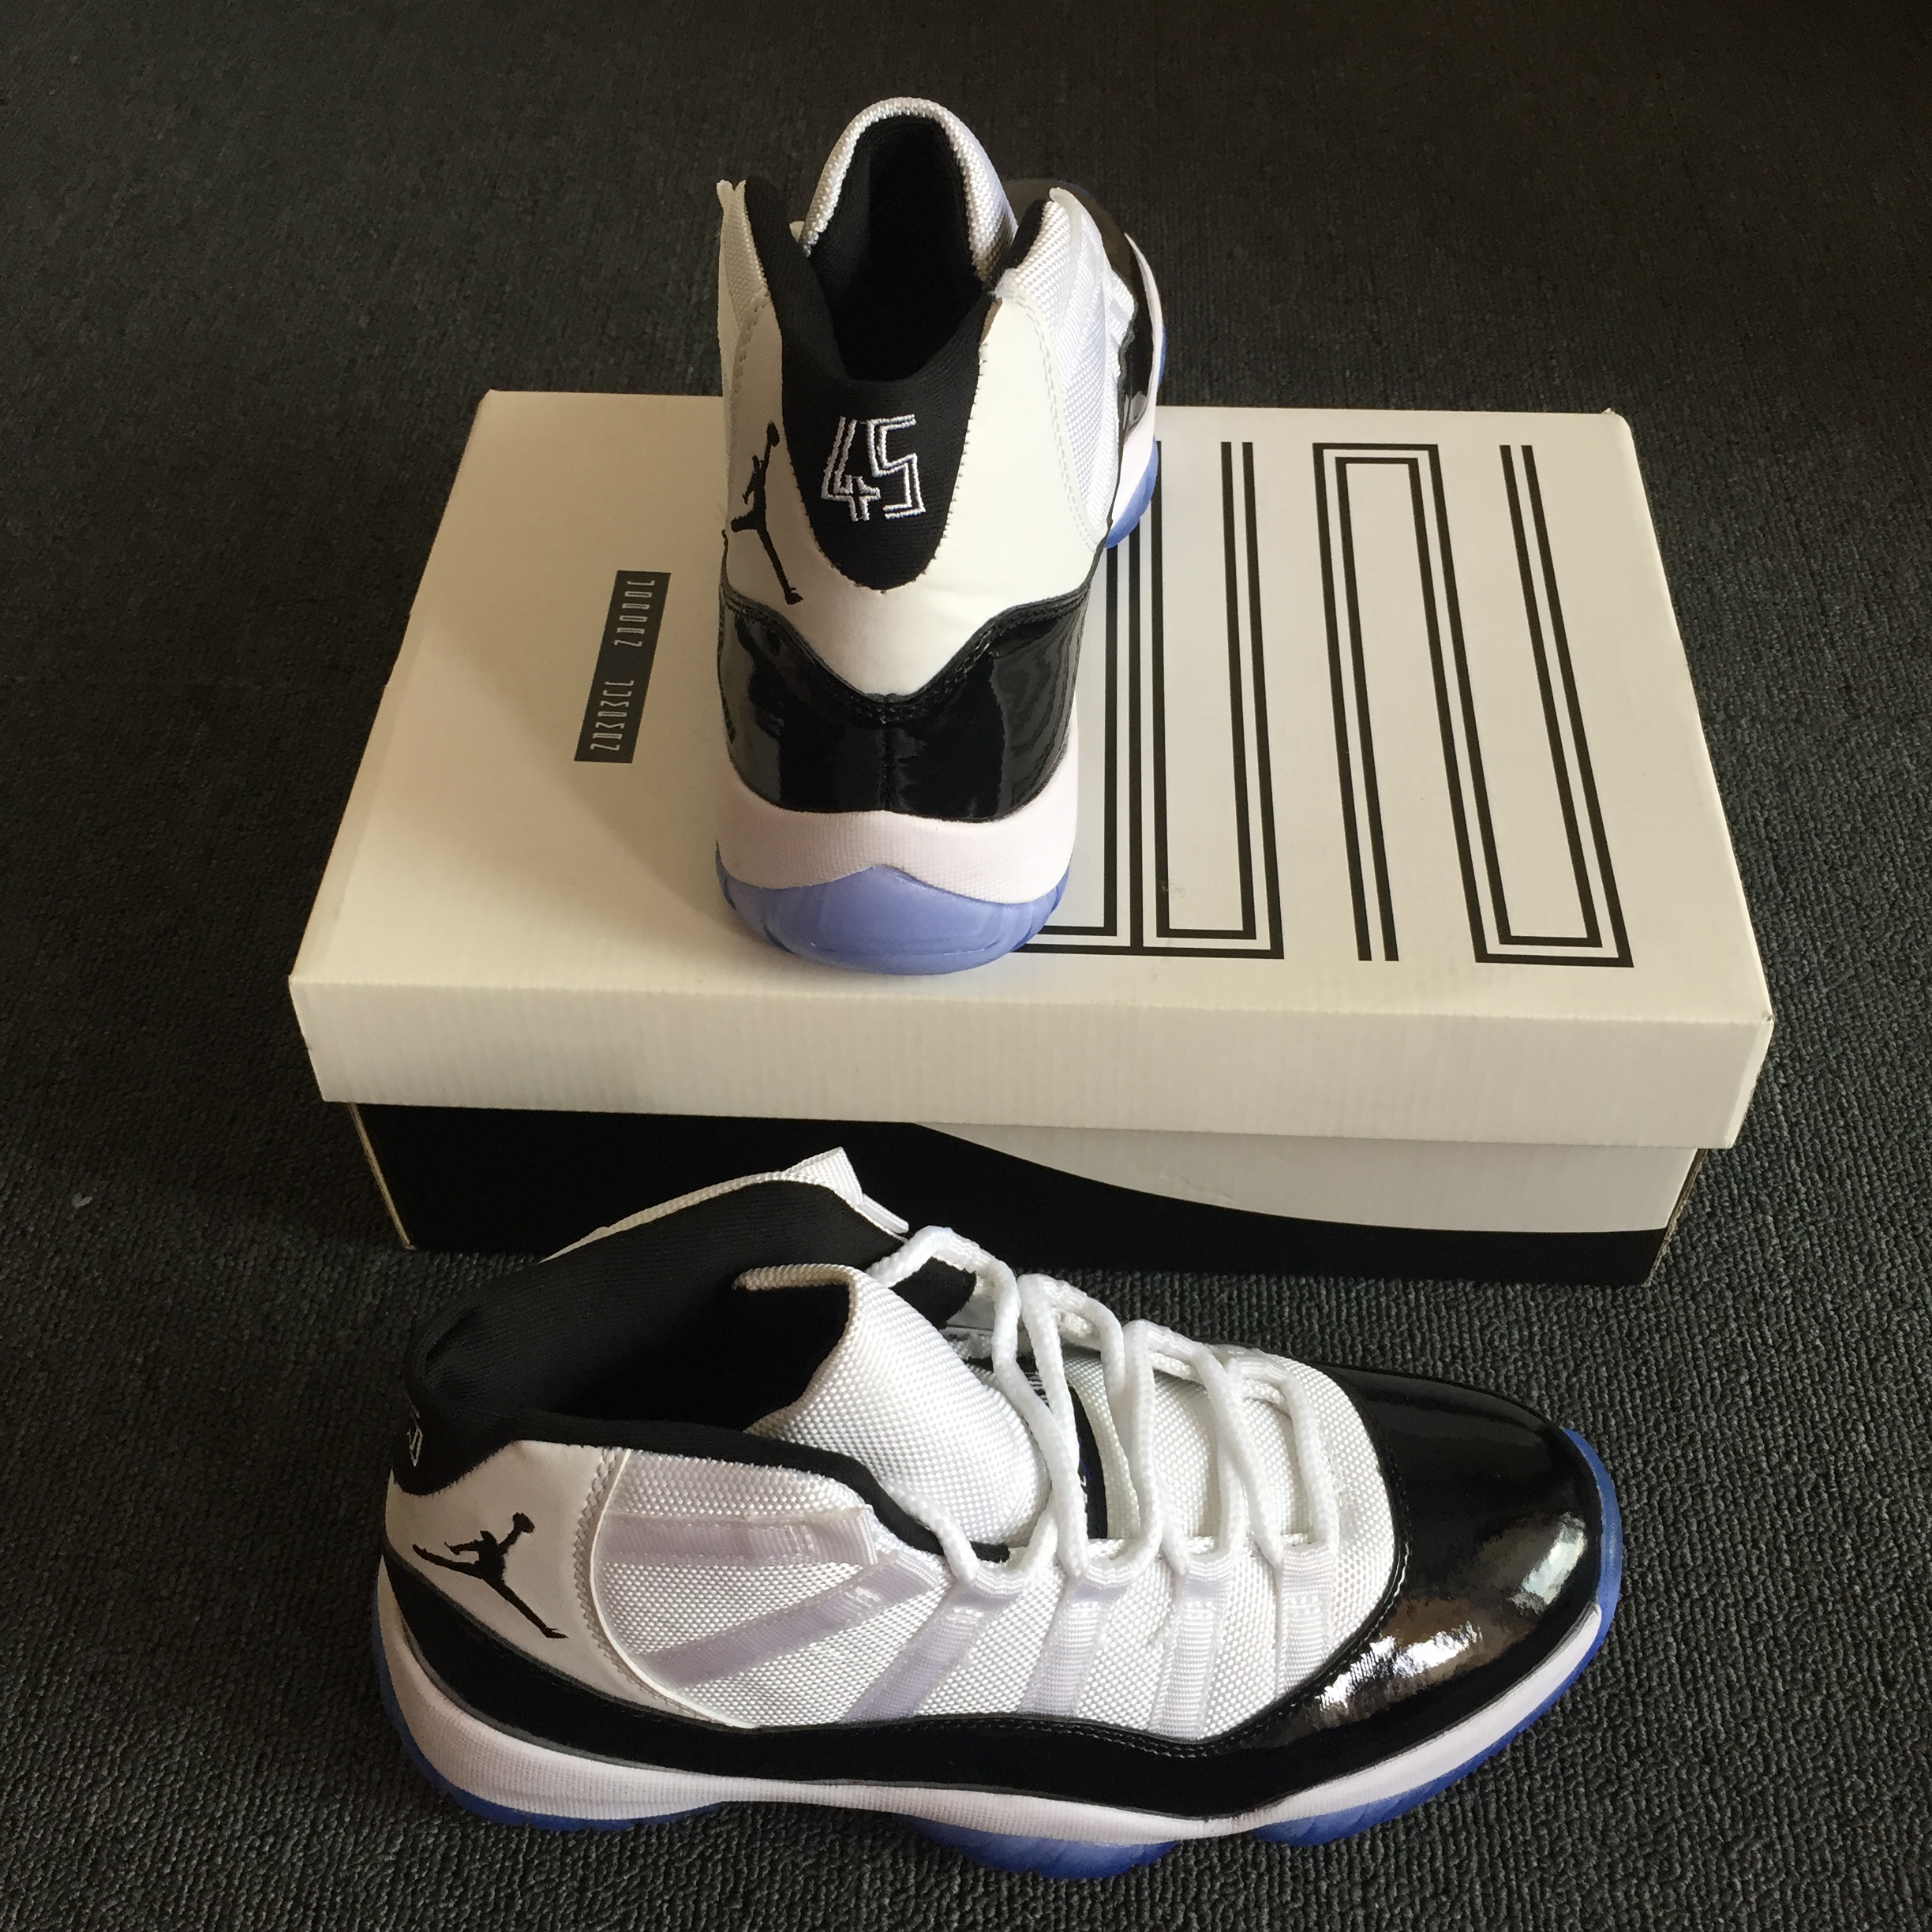 2018 Air Jordan 11 Concord with Number 45 Shoes - Click Image to Close